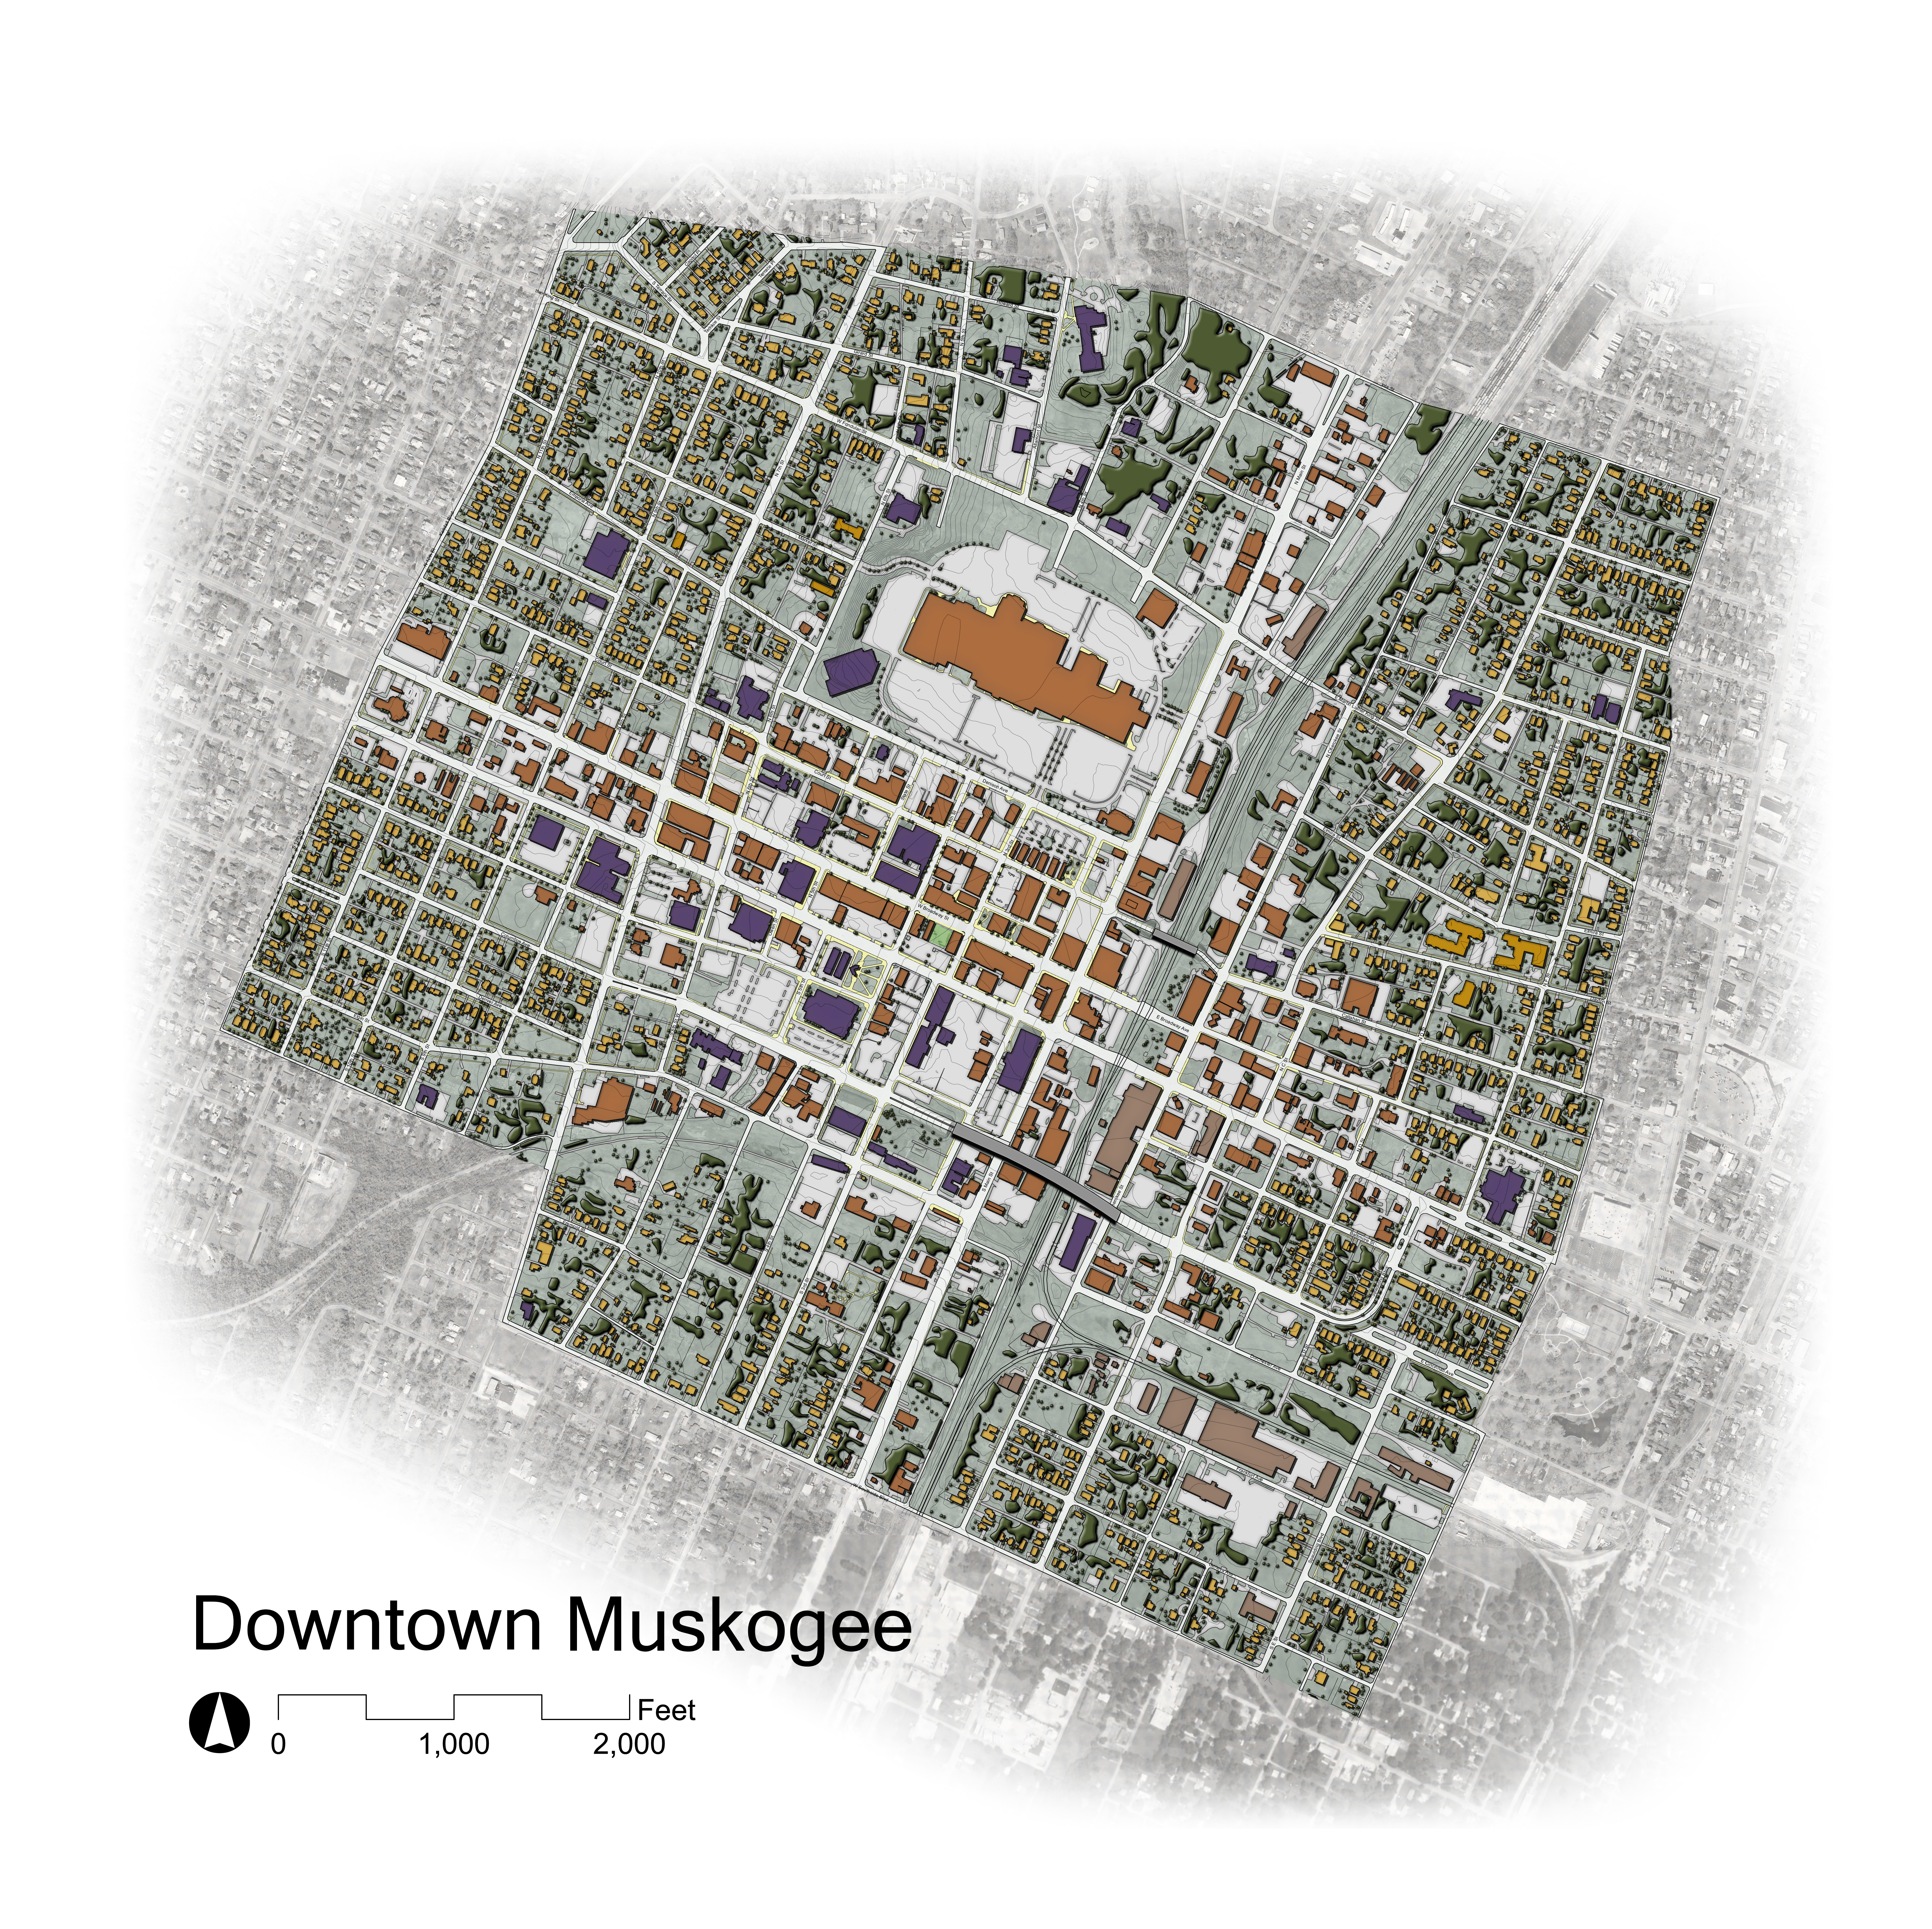 Downtown Muskogee Illustrated Plan